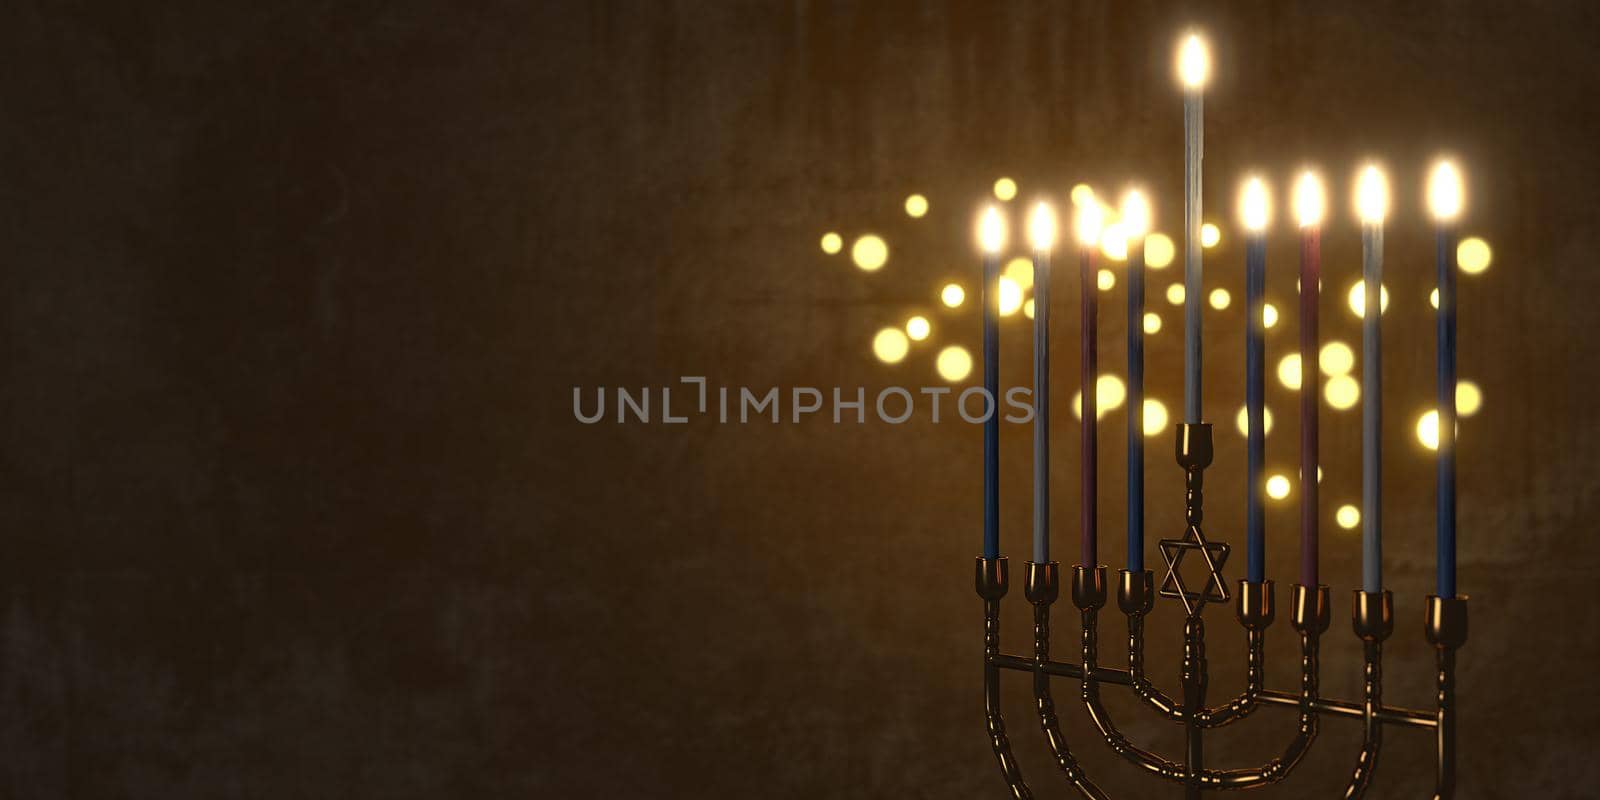 3d rendering  Low key image of jewish holiday Hanukkah background with menorah (traditional candelabra) and burning candles.